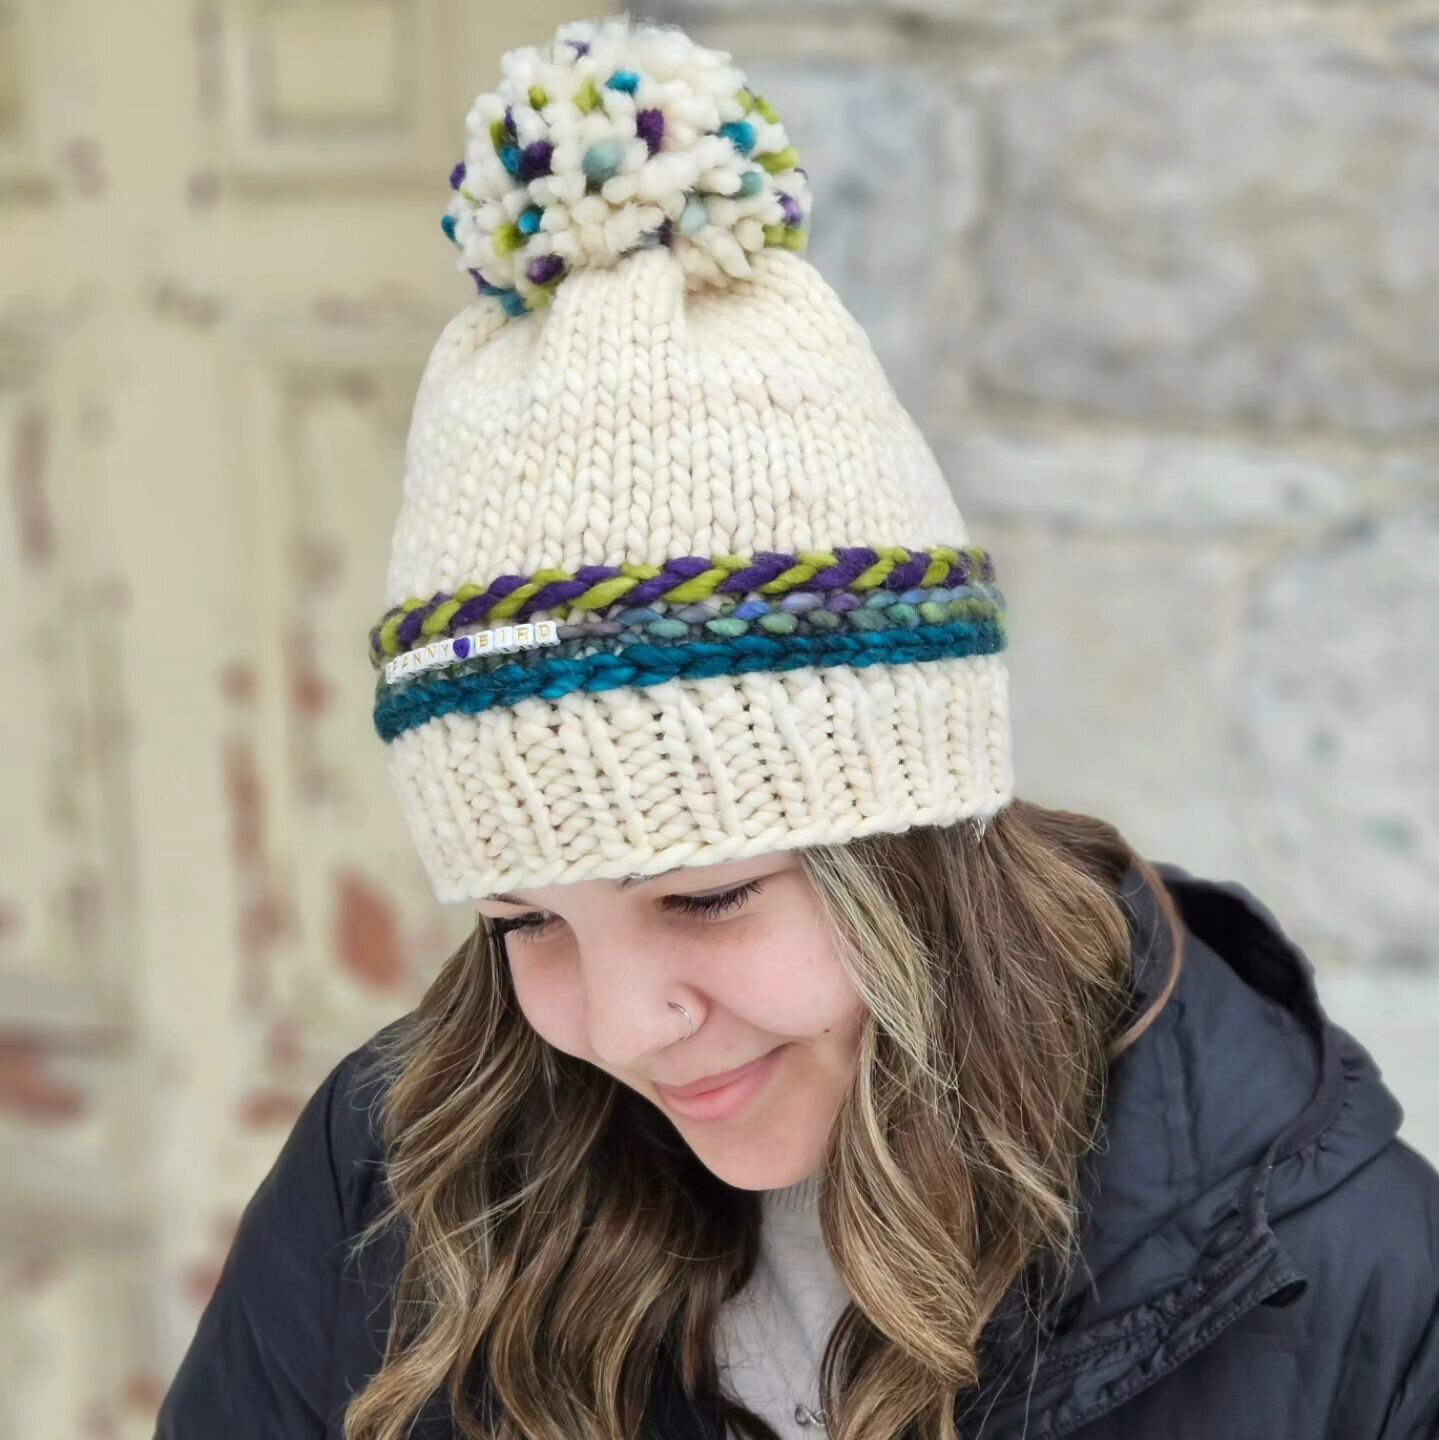 We're wrapping up this month with a new Shoppe sample and kit!

Introducing the Friendship Bracelet Beanie designed by Jill DeMarco @yarn_it_all_. Our sample has been knit using Malabrigo Rasta and embellished with fun letter beads. 

We've curated 6